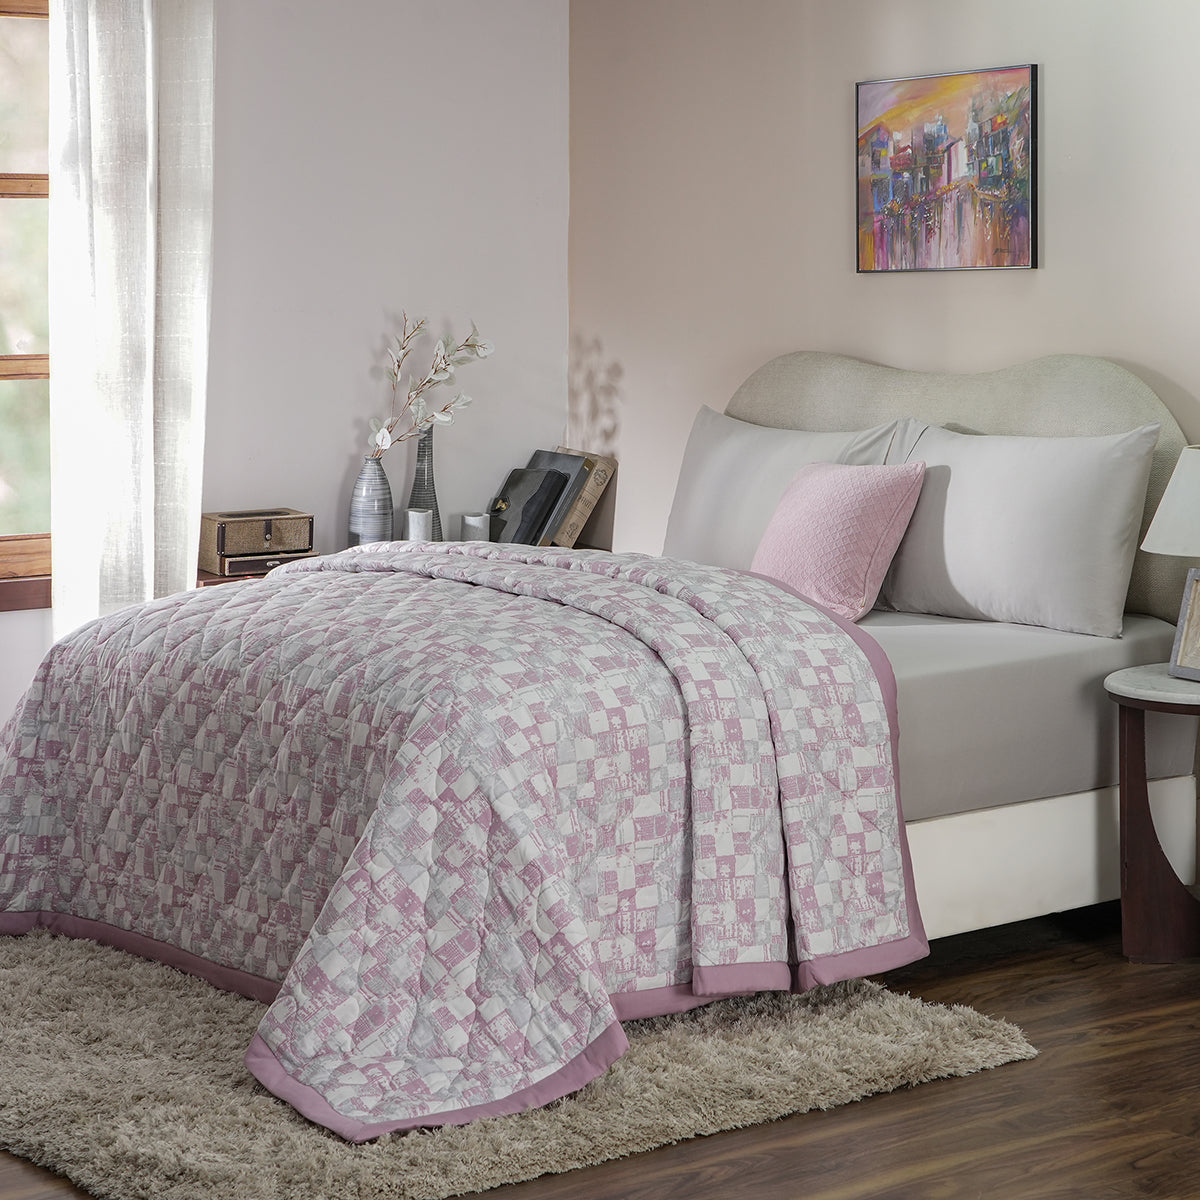 Hues PBS Refined Retro Rochelle Quilt